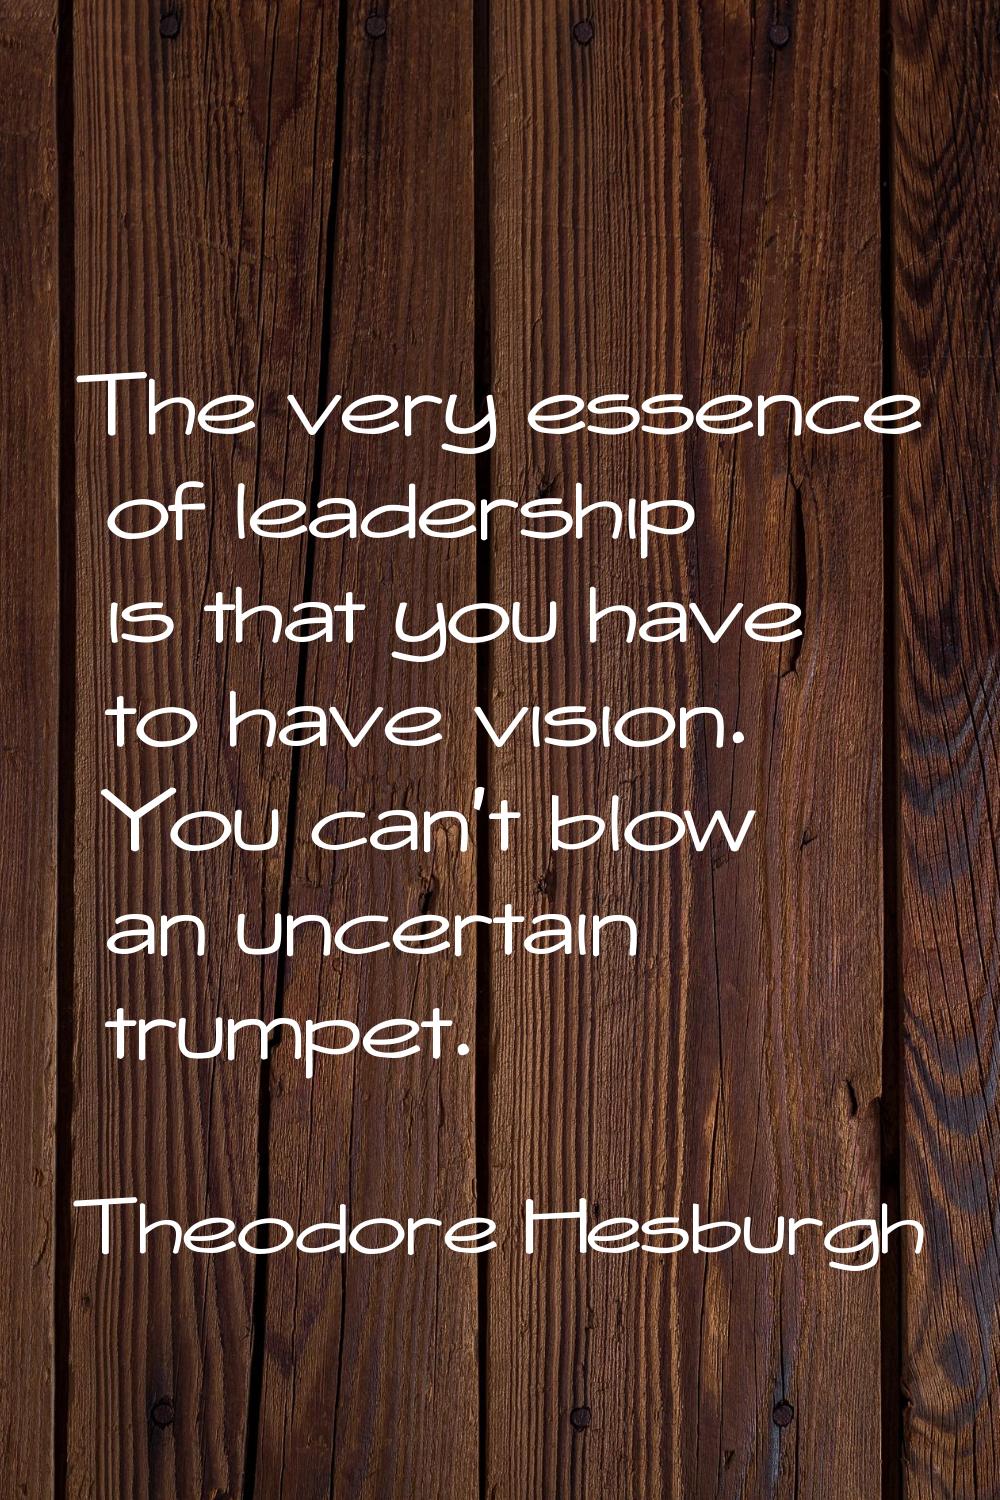 The very essence of leadership is that you have to have vision. You can't blow an uncertain trumpet